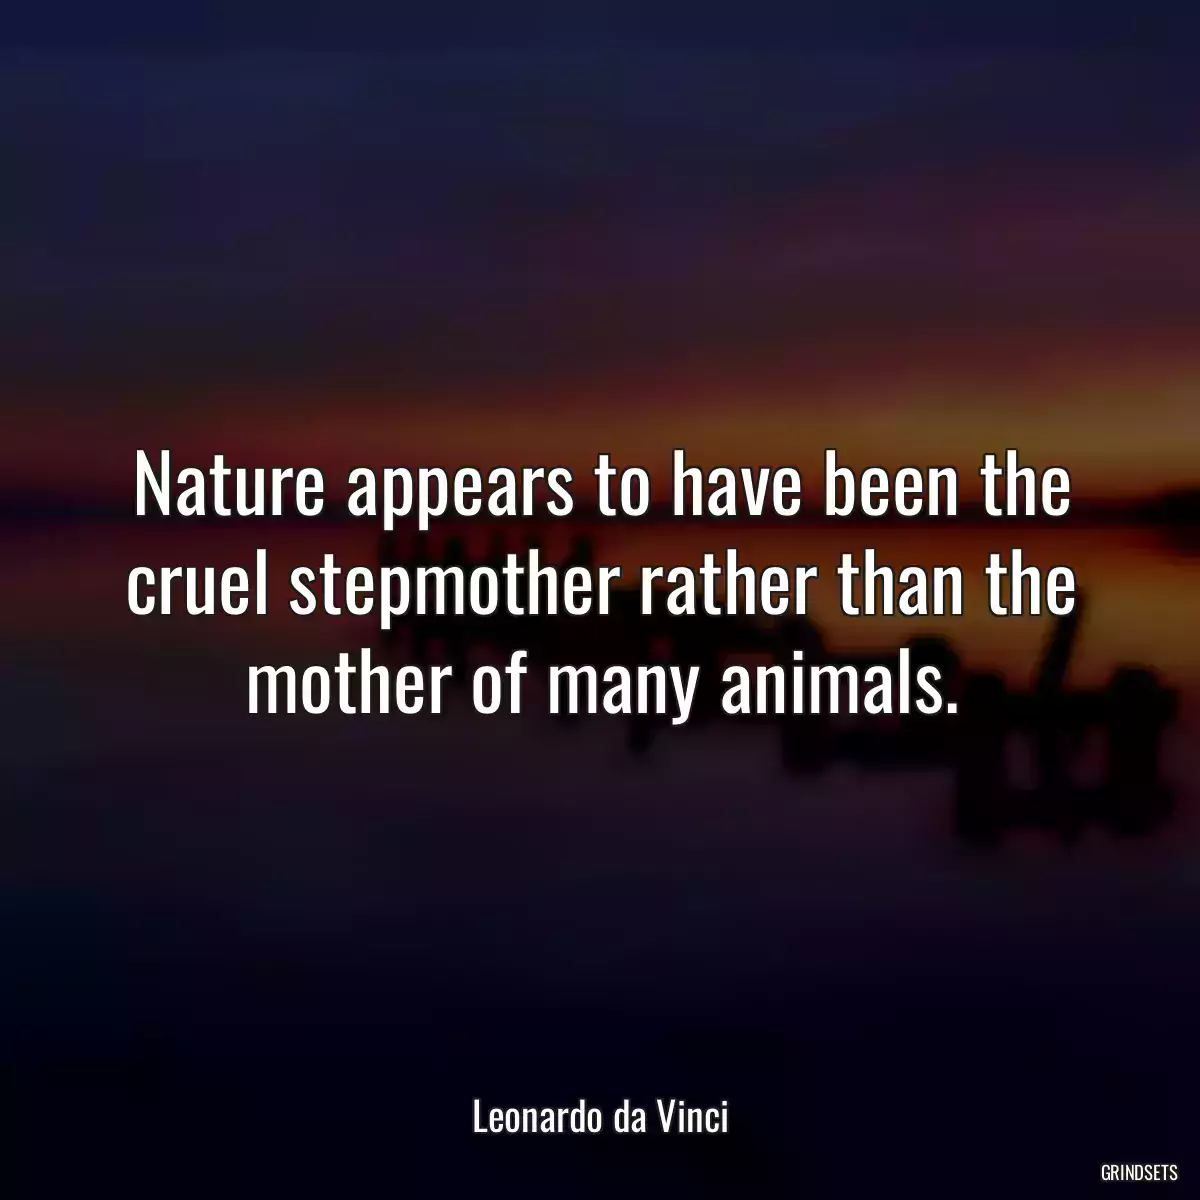 Nature appears to have been the cruel stepmother rather than the mother of many animals.